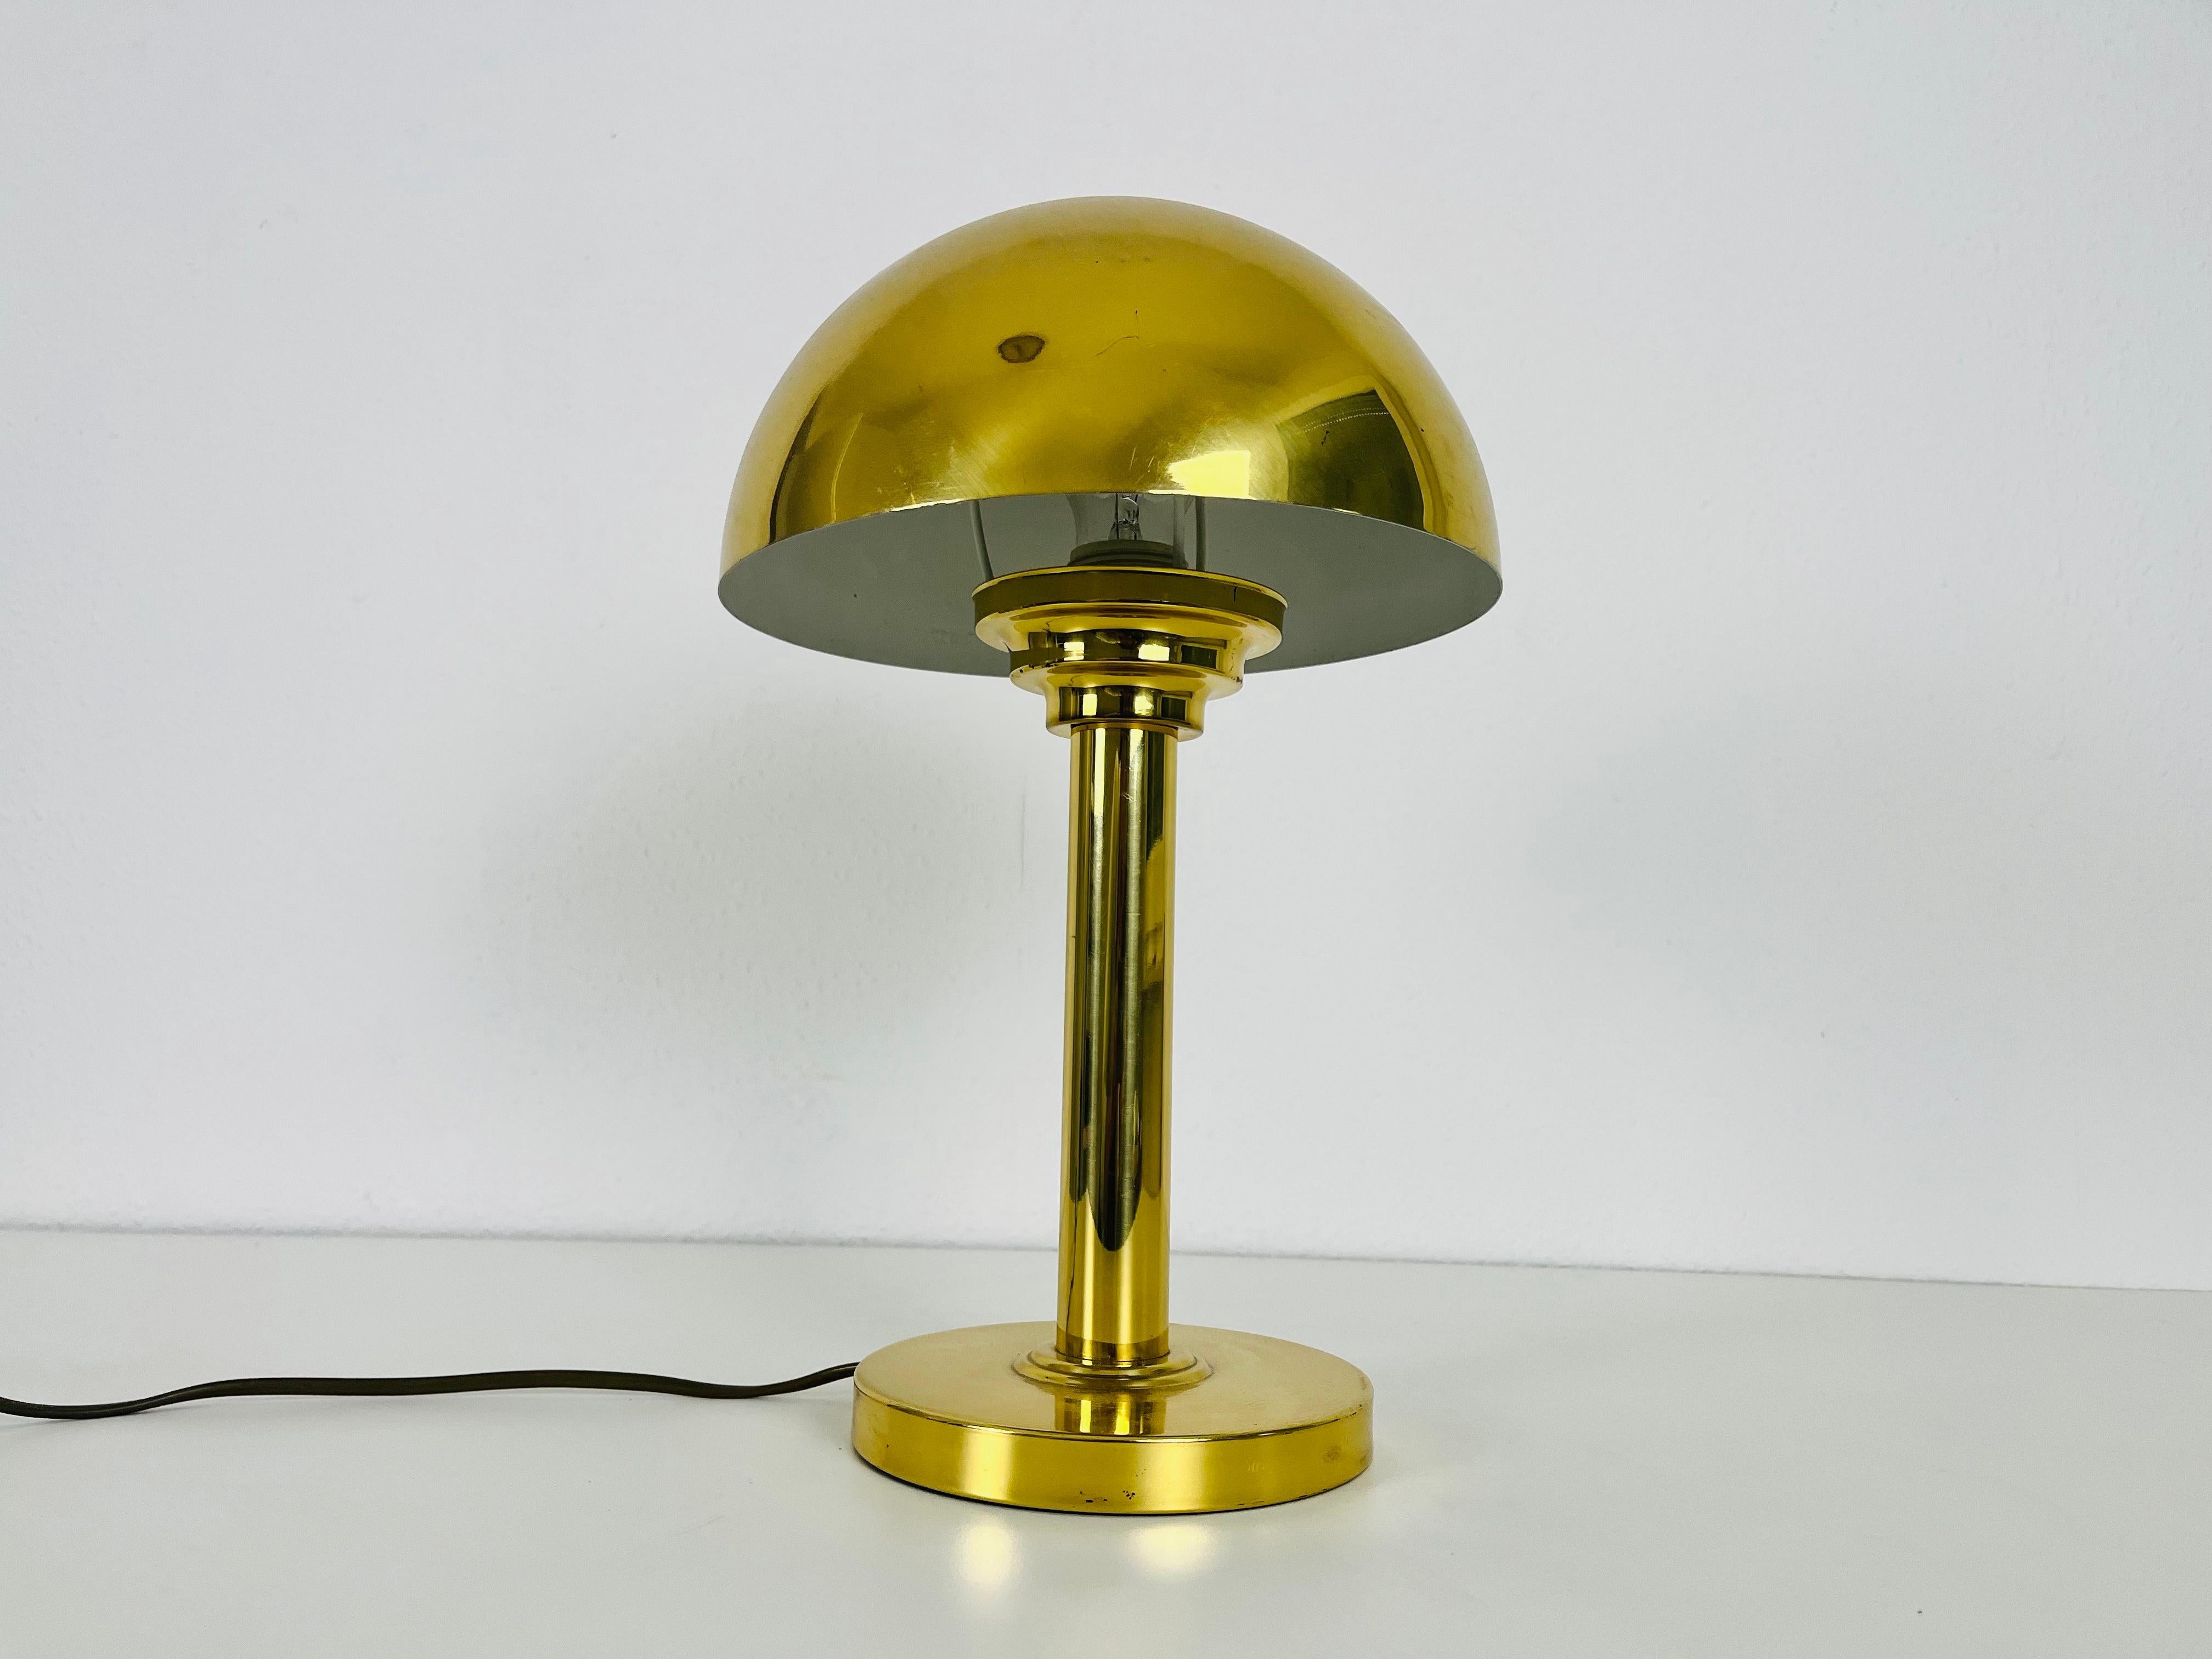 A beautiful mid-century table lamp made in Italy in the 1960s. It is fascinating with its beautiful shade. The table lamp is made of polished brass.

Good vintage condition. The lighing requires a E27 light bulb. Works with both 120/220V.

Free